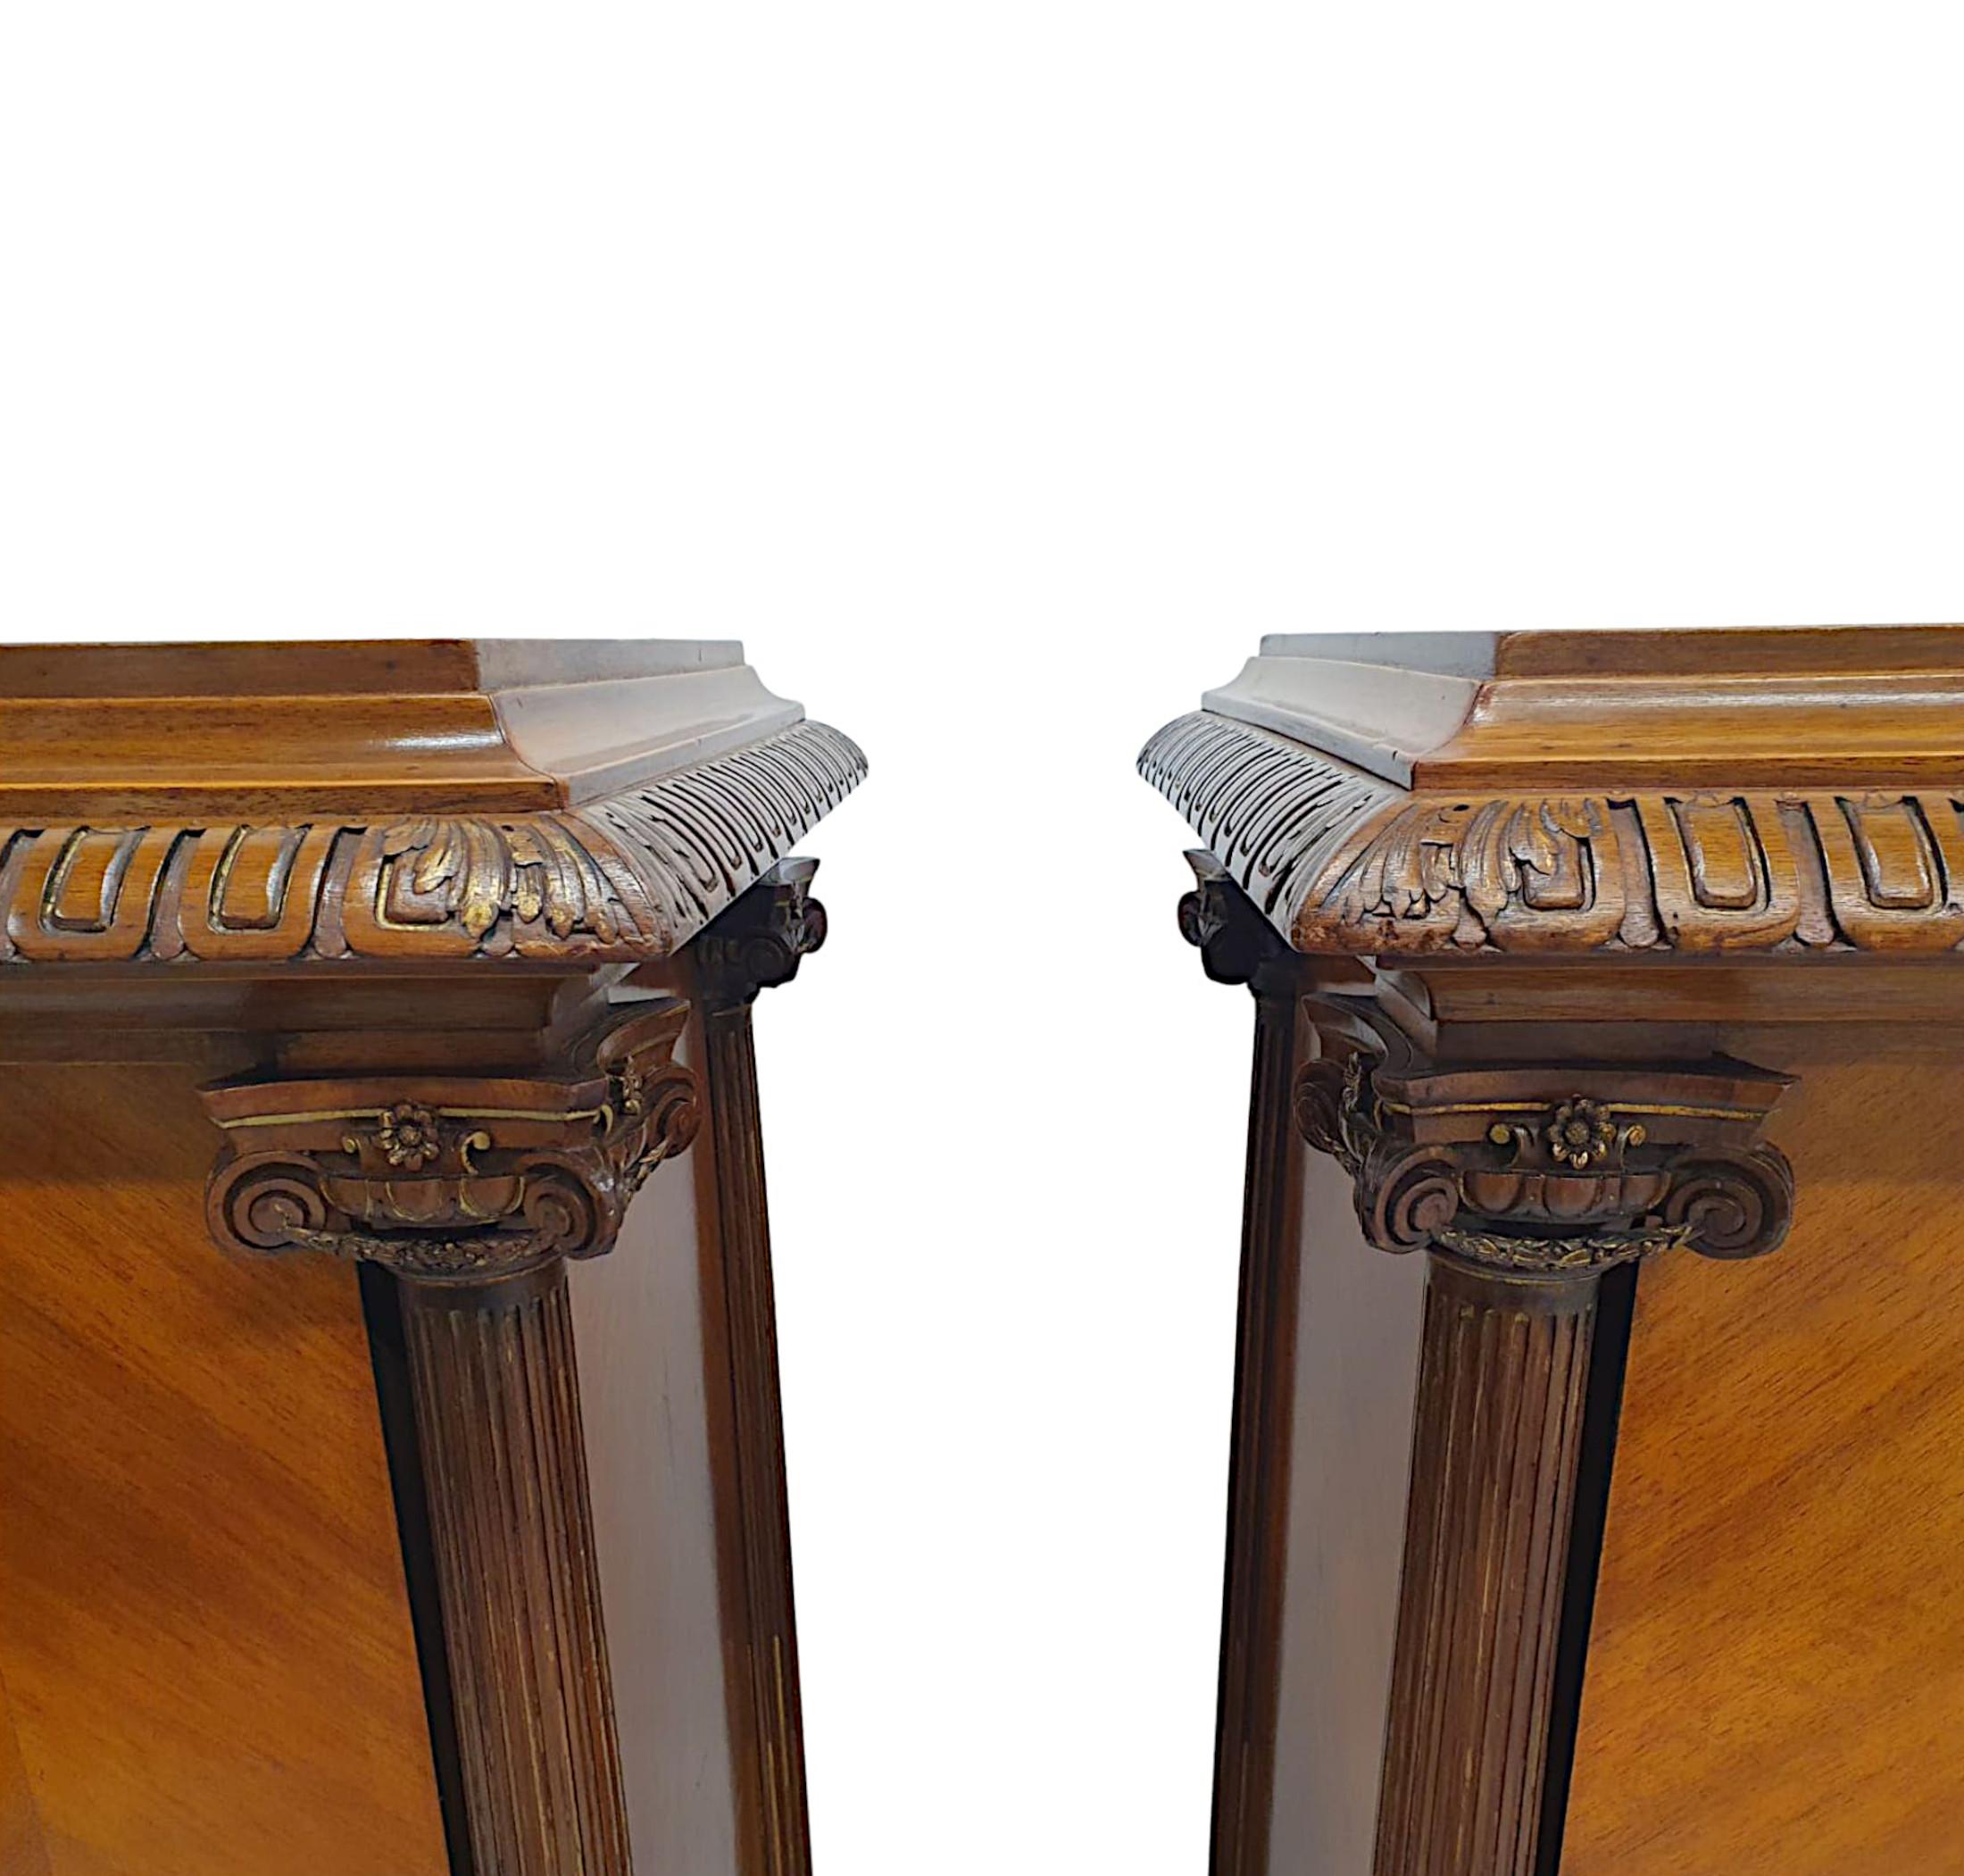 Kingwood  A Very Rare and Fine Pair of 19th Century Bust or Plant Stands  For Sale